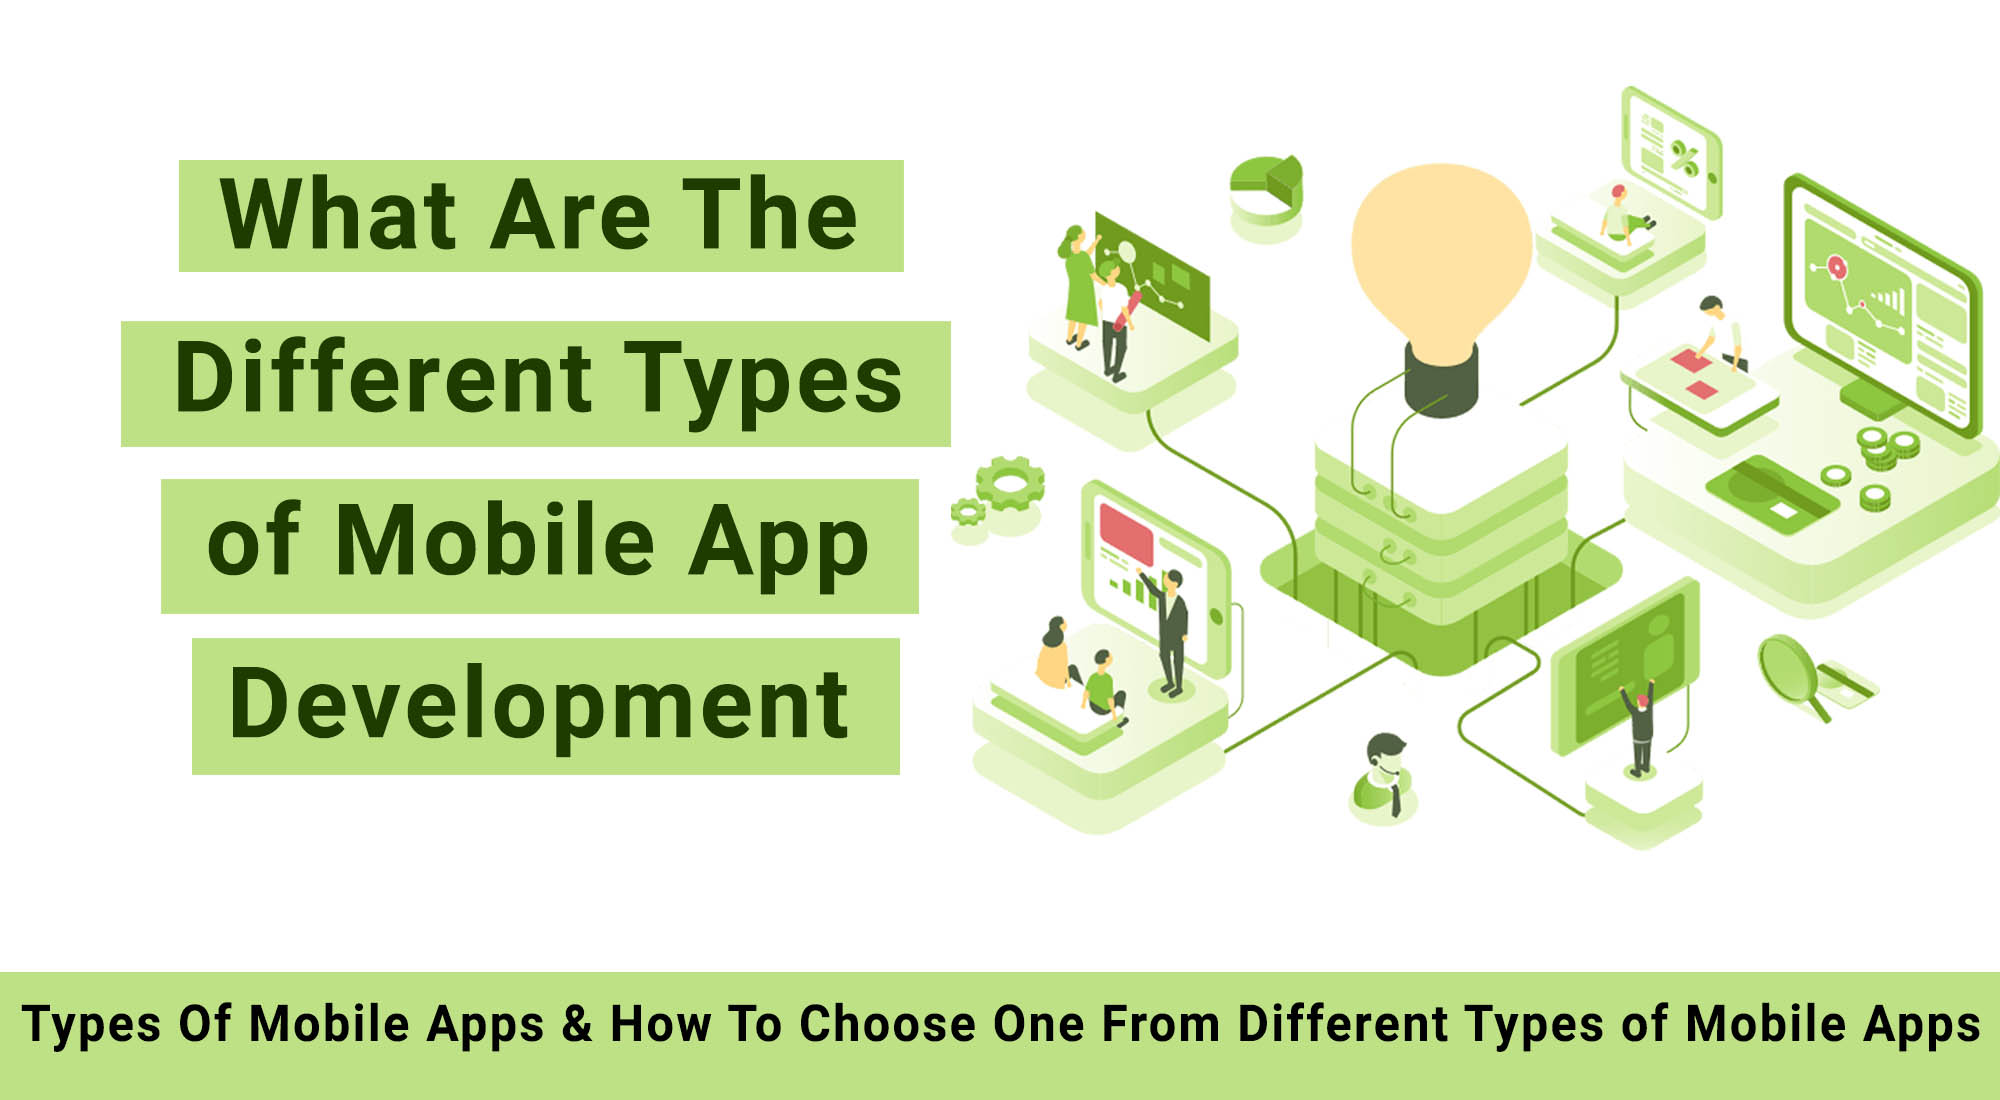 What are the different types of mobile app development